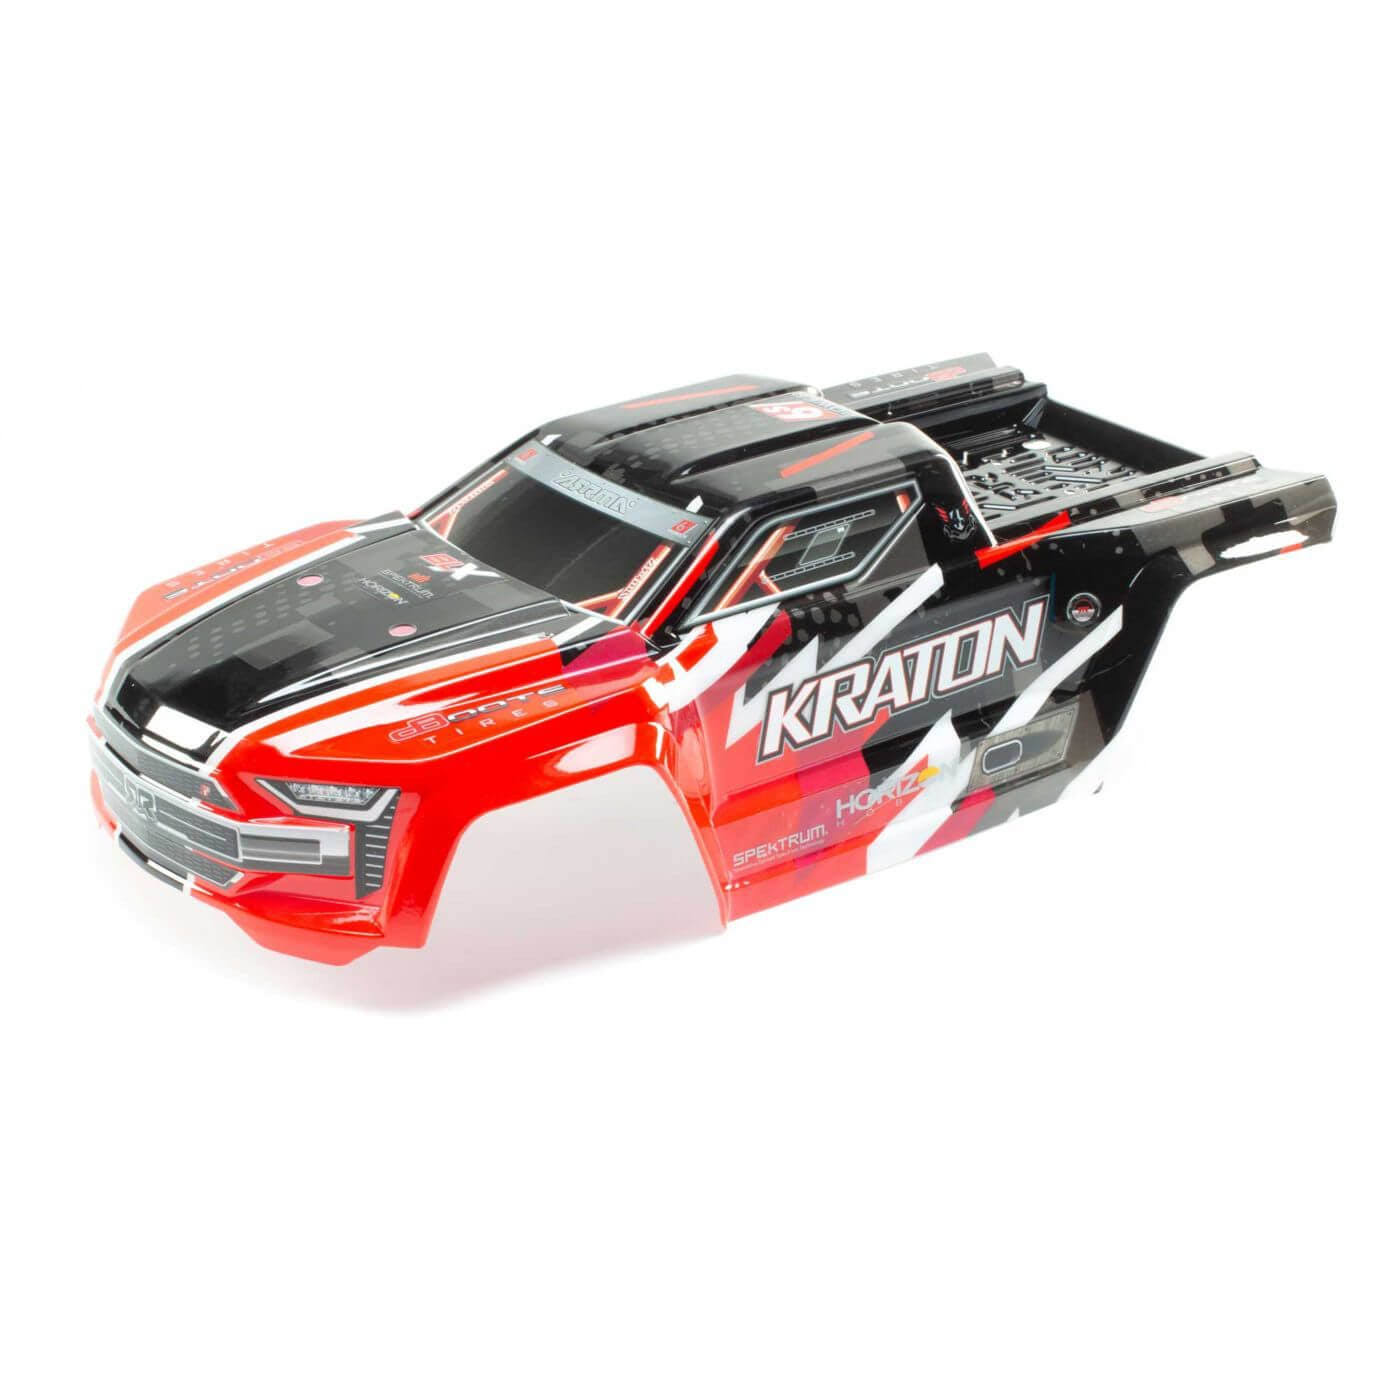 Arrma Kraton 6s BLX Painted Decaled Trimmed Body (Red) Ara406156